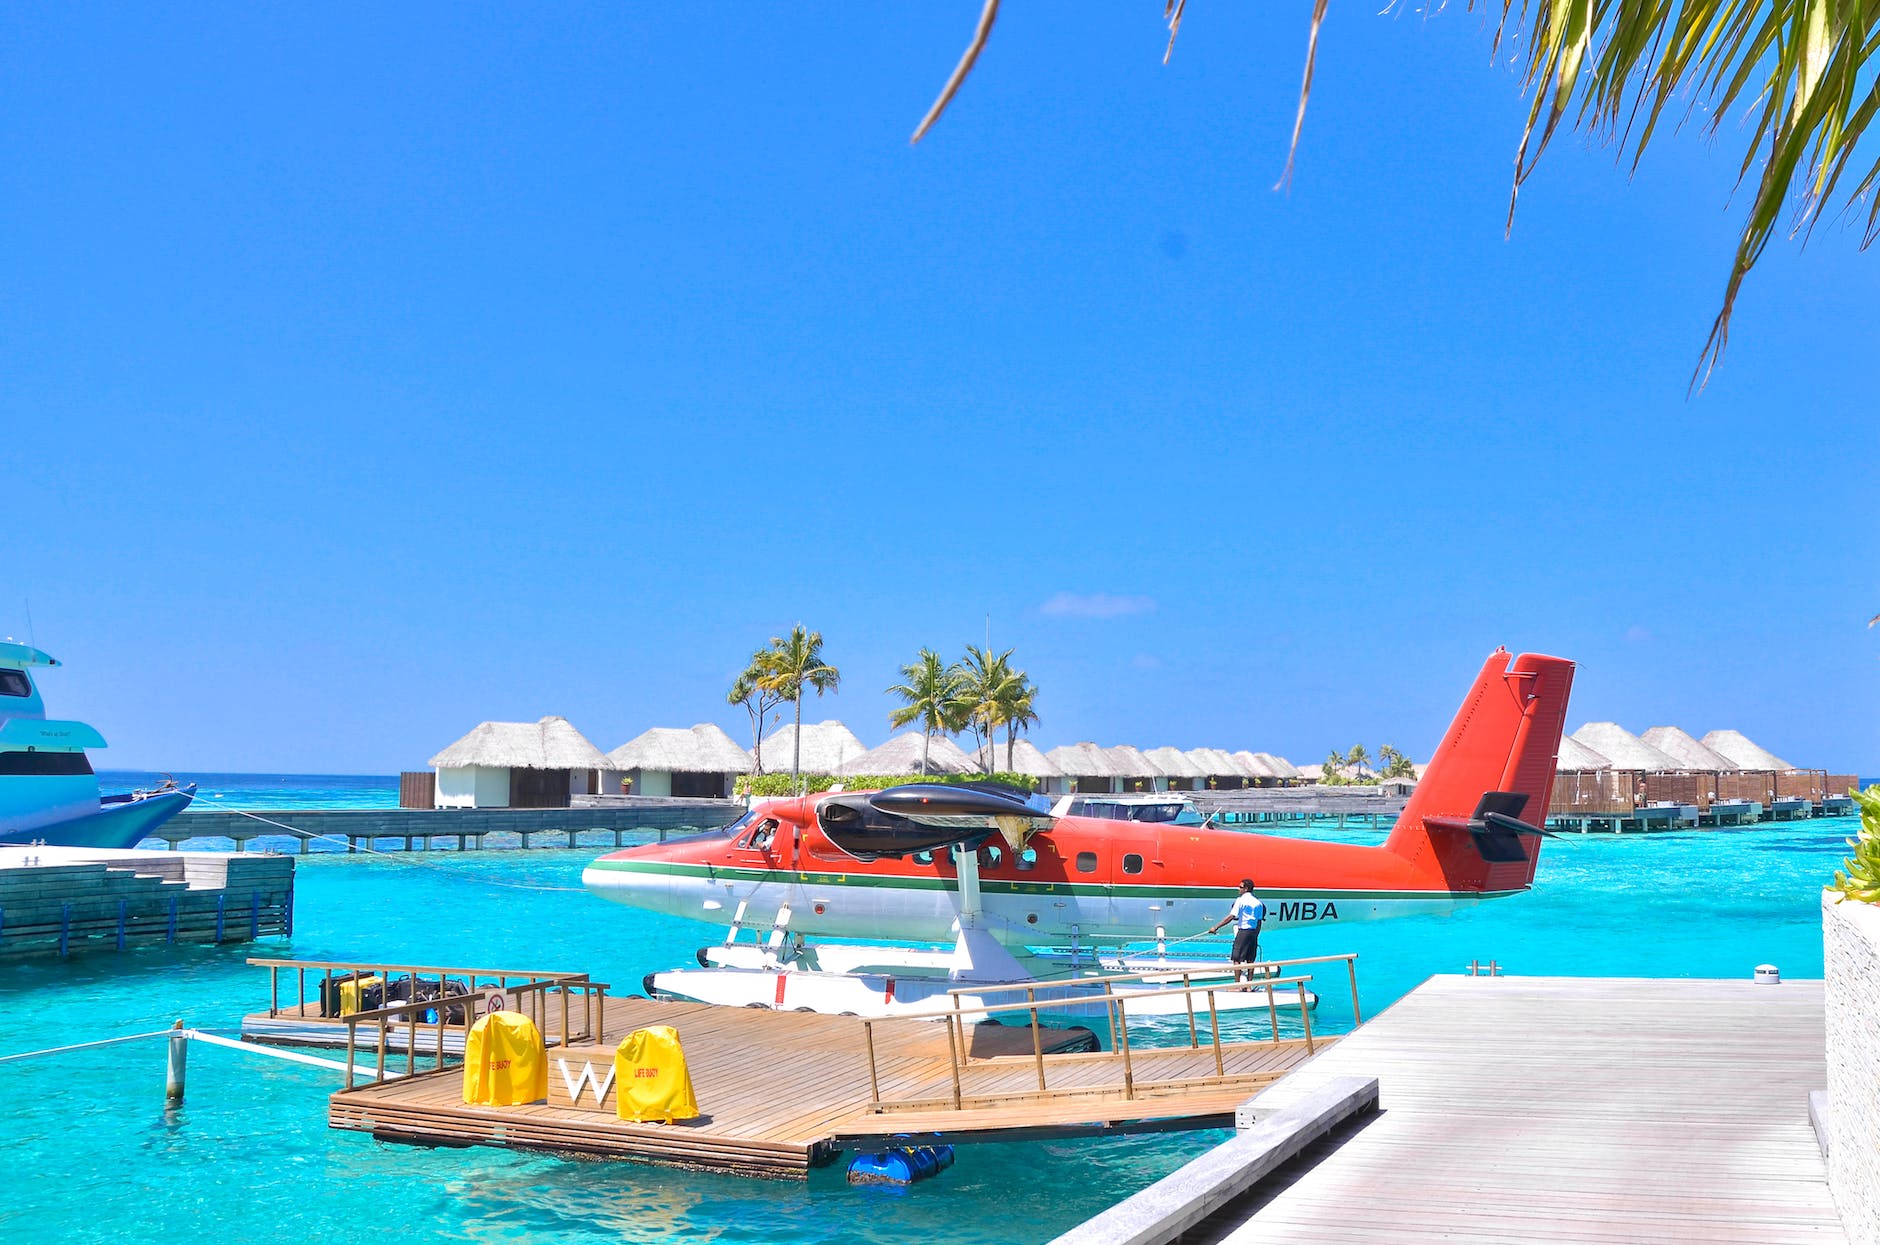 white and red seaplane on body of water